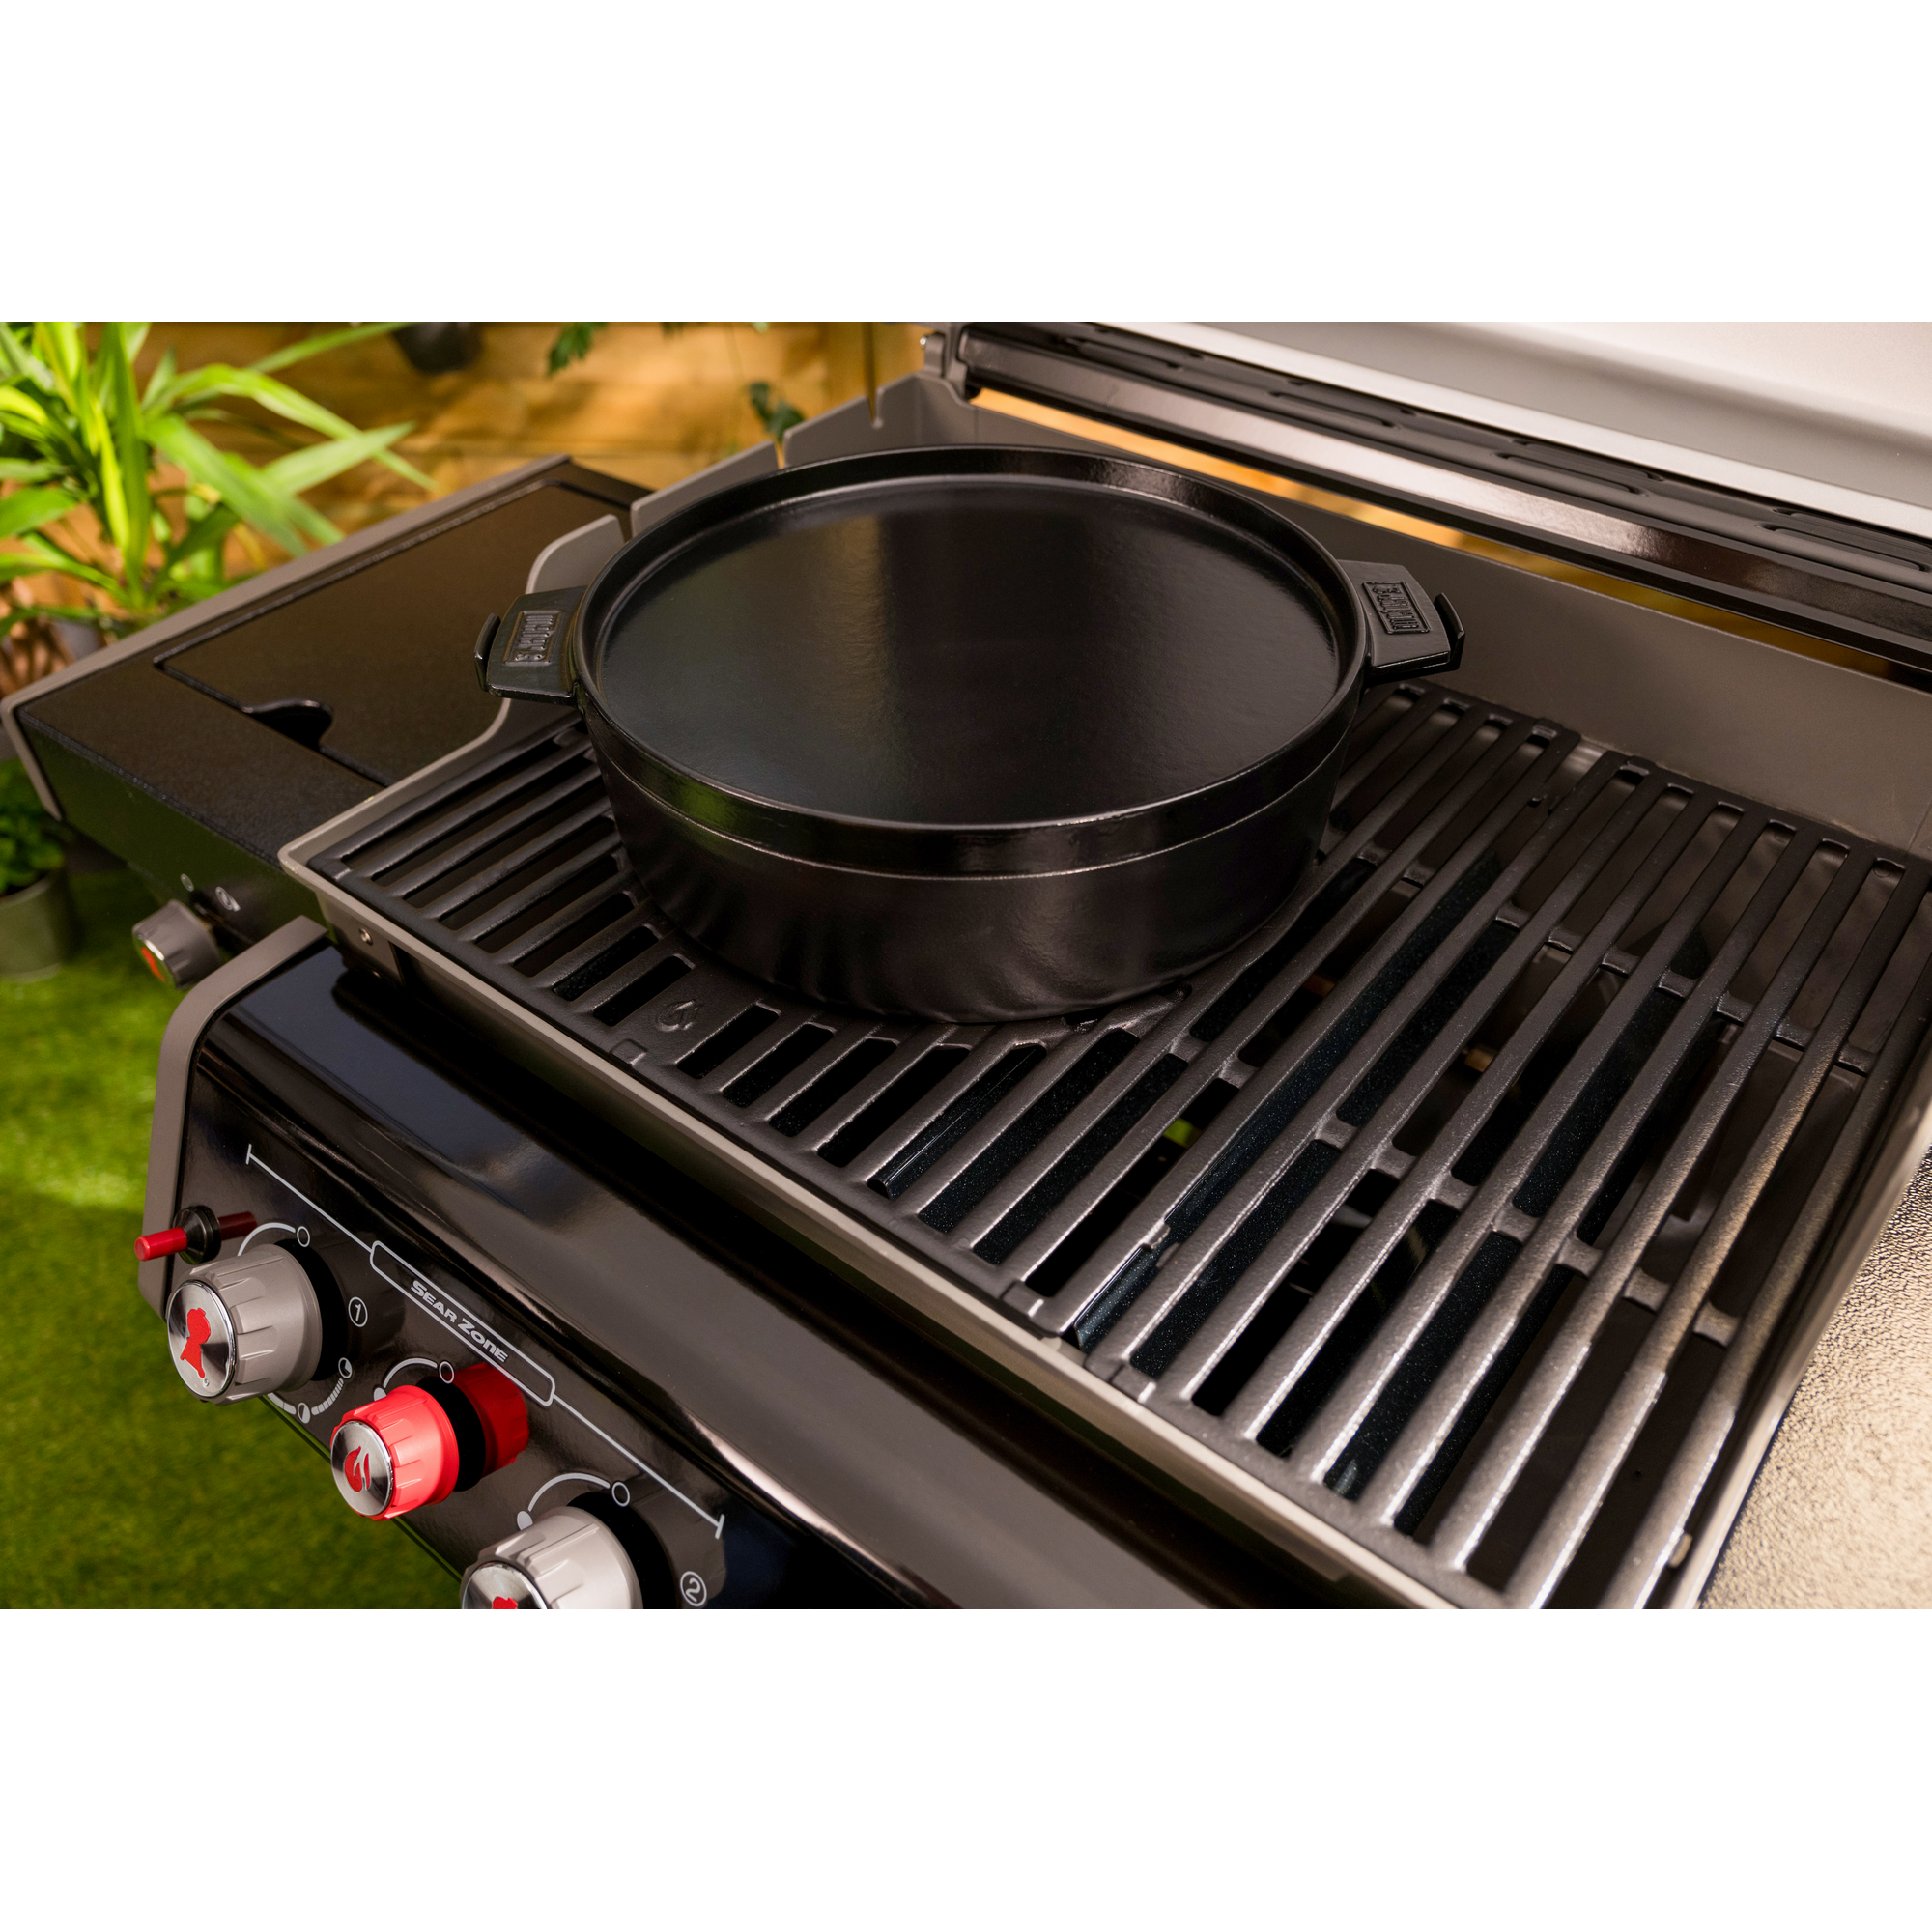 Gasgrill 'Spirit E-330 Classic GBS' schwarz + product picture